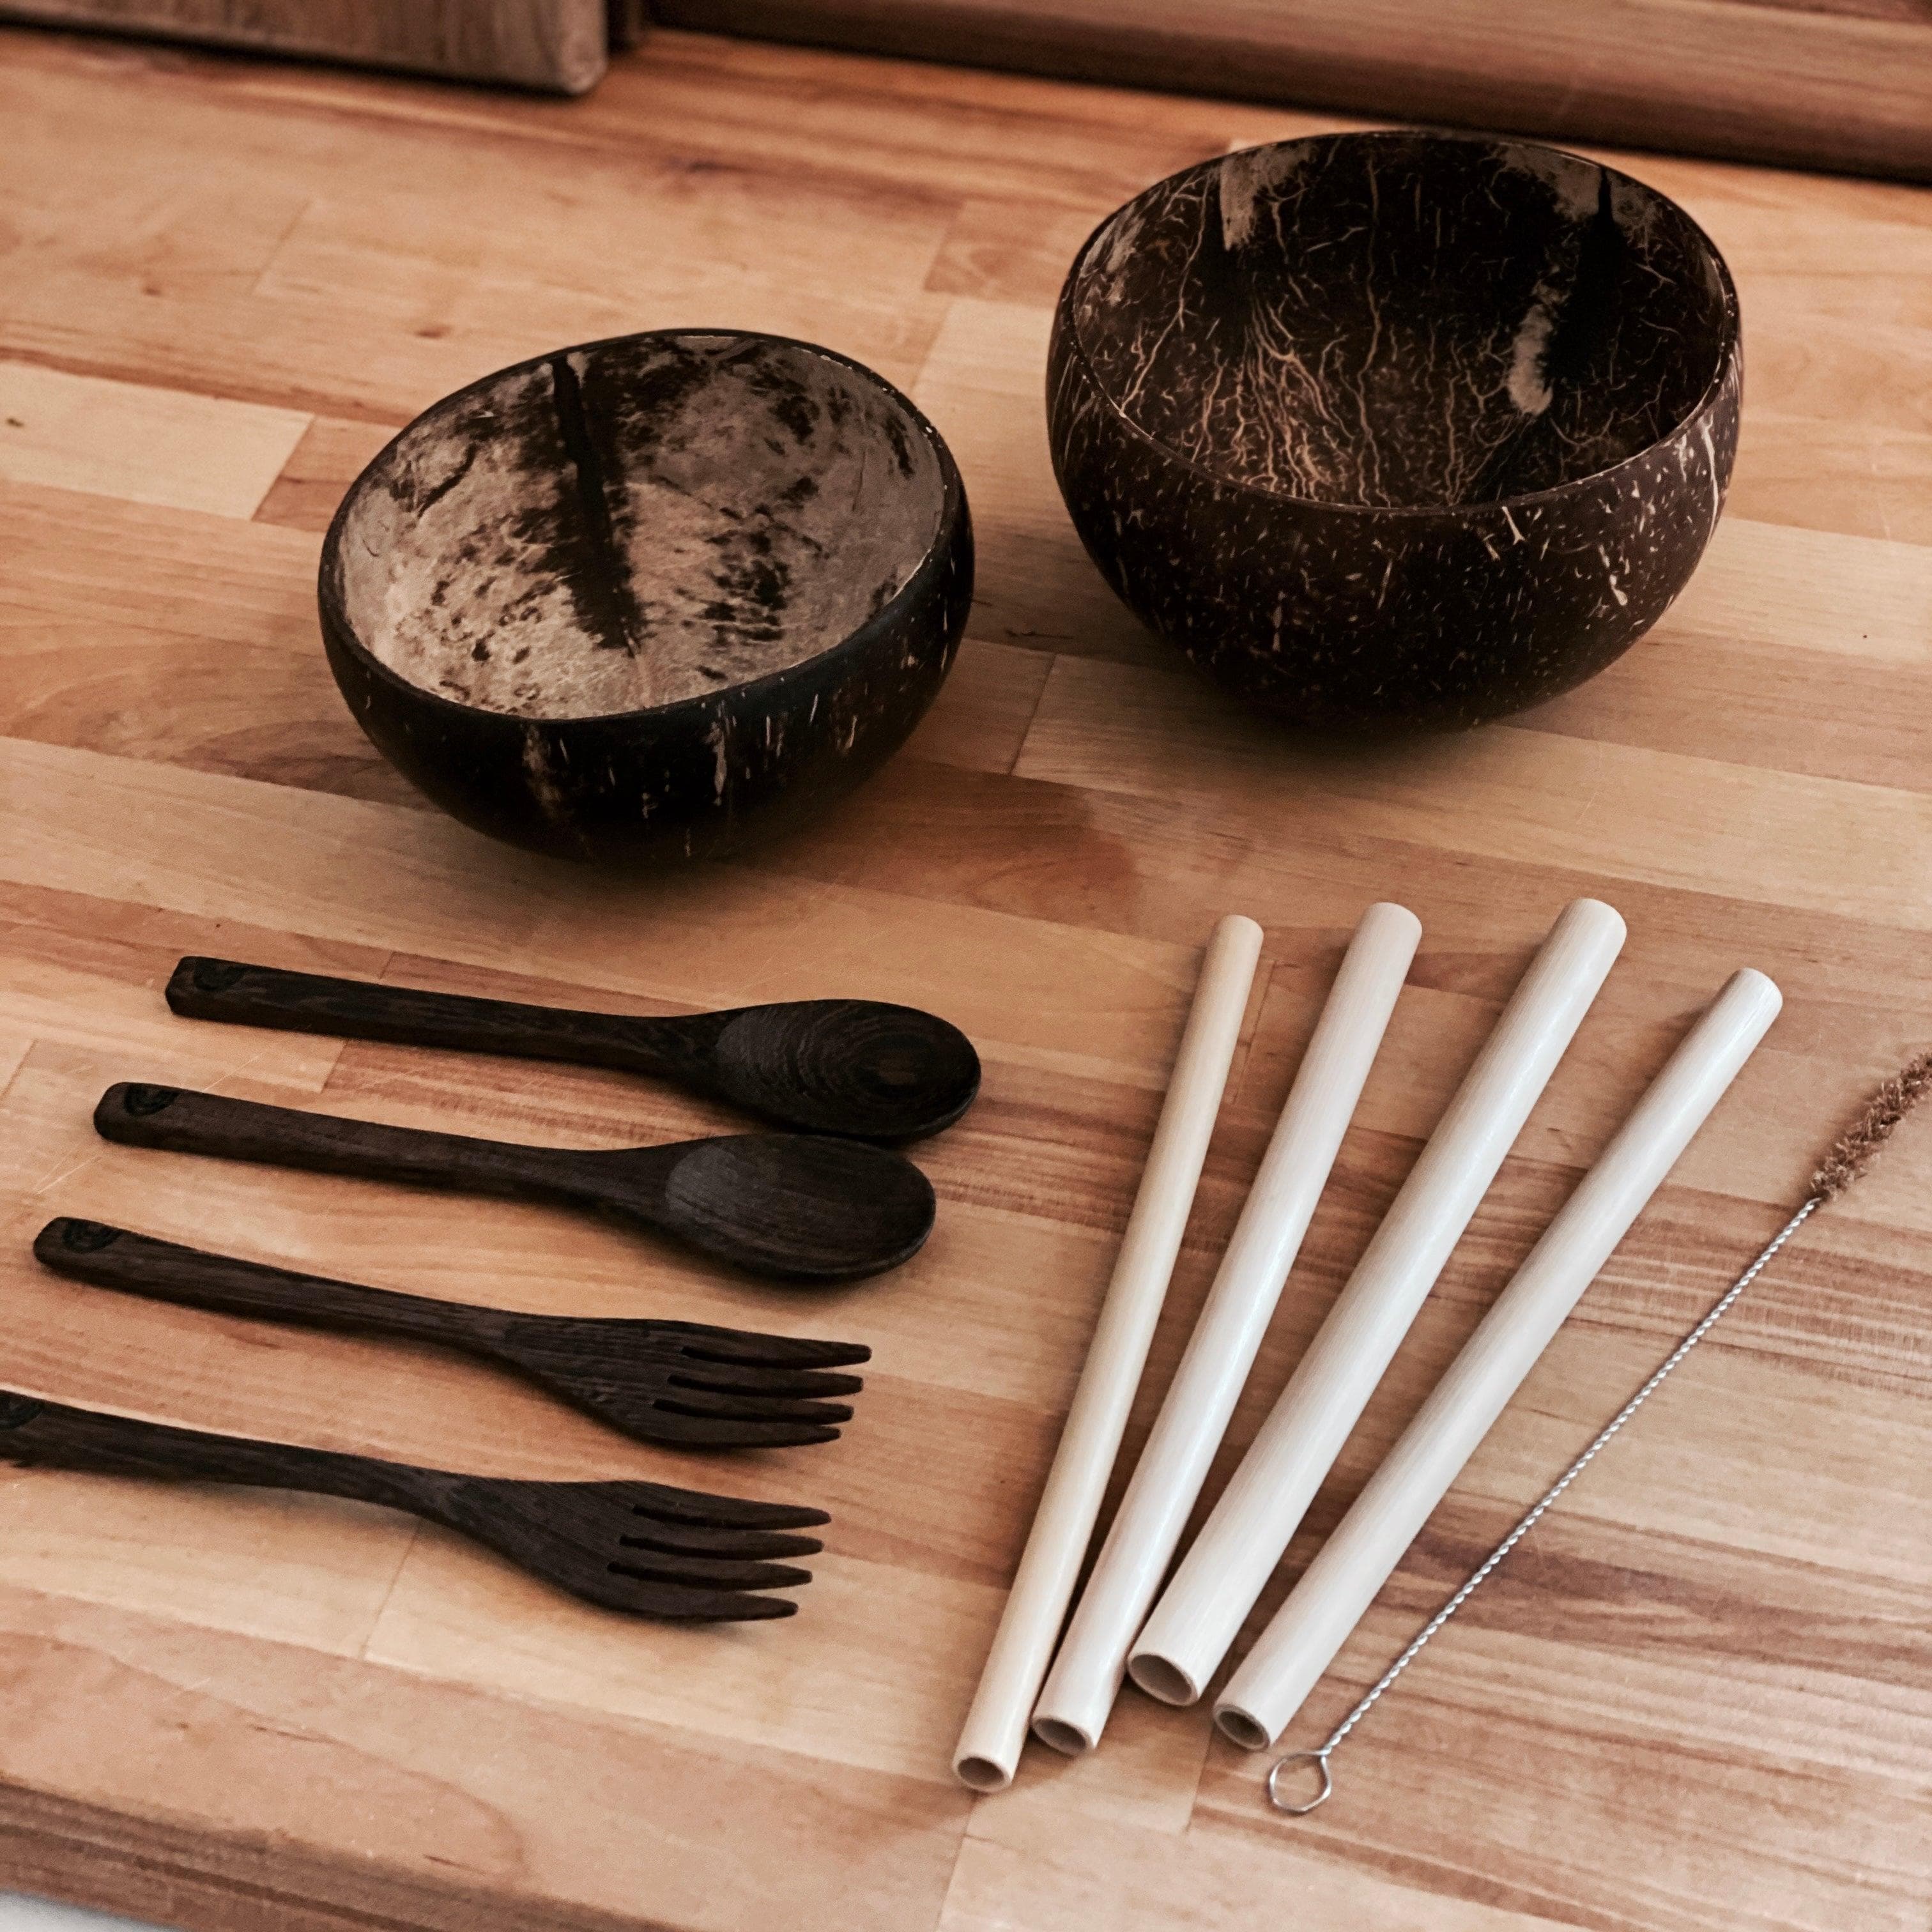 Eco Coco Pack | SAVE 10%! - Coco Bowls | Organic Coconut Bowls | Bamboo Straws | Zero Waste Goods